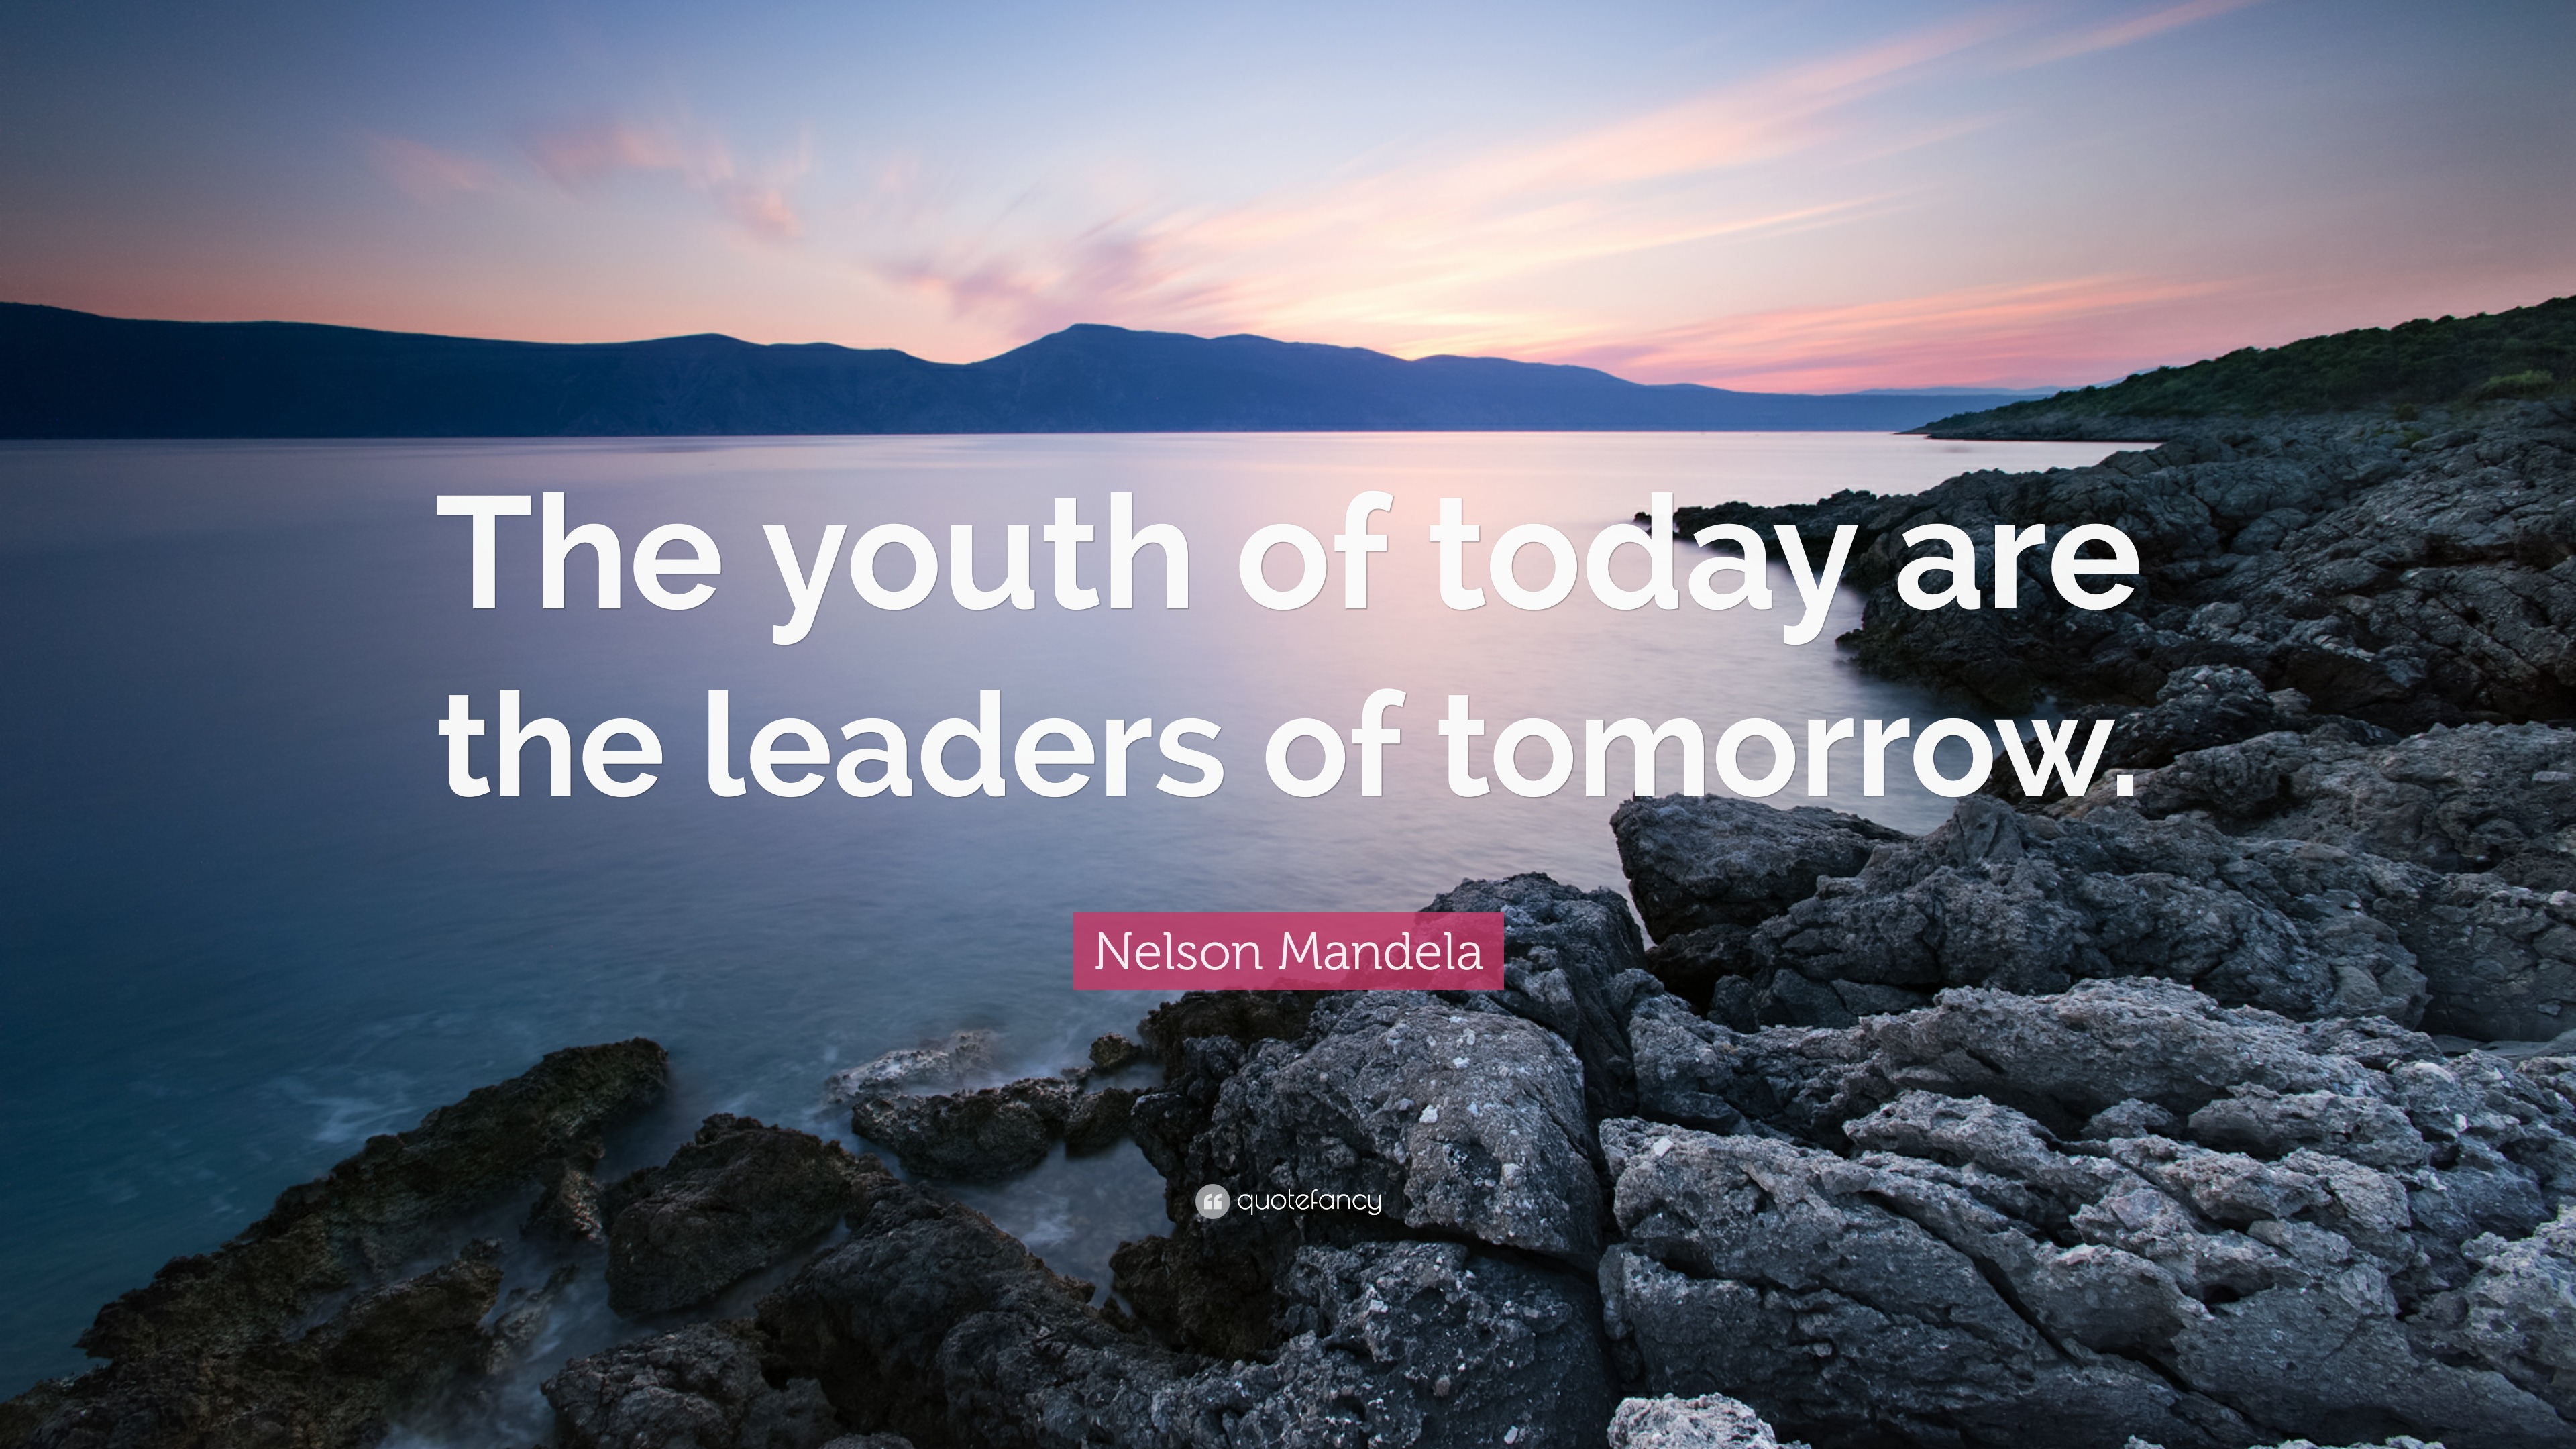 the children of today are the leaders of tomorrow quote